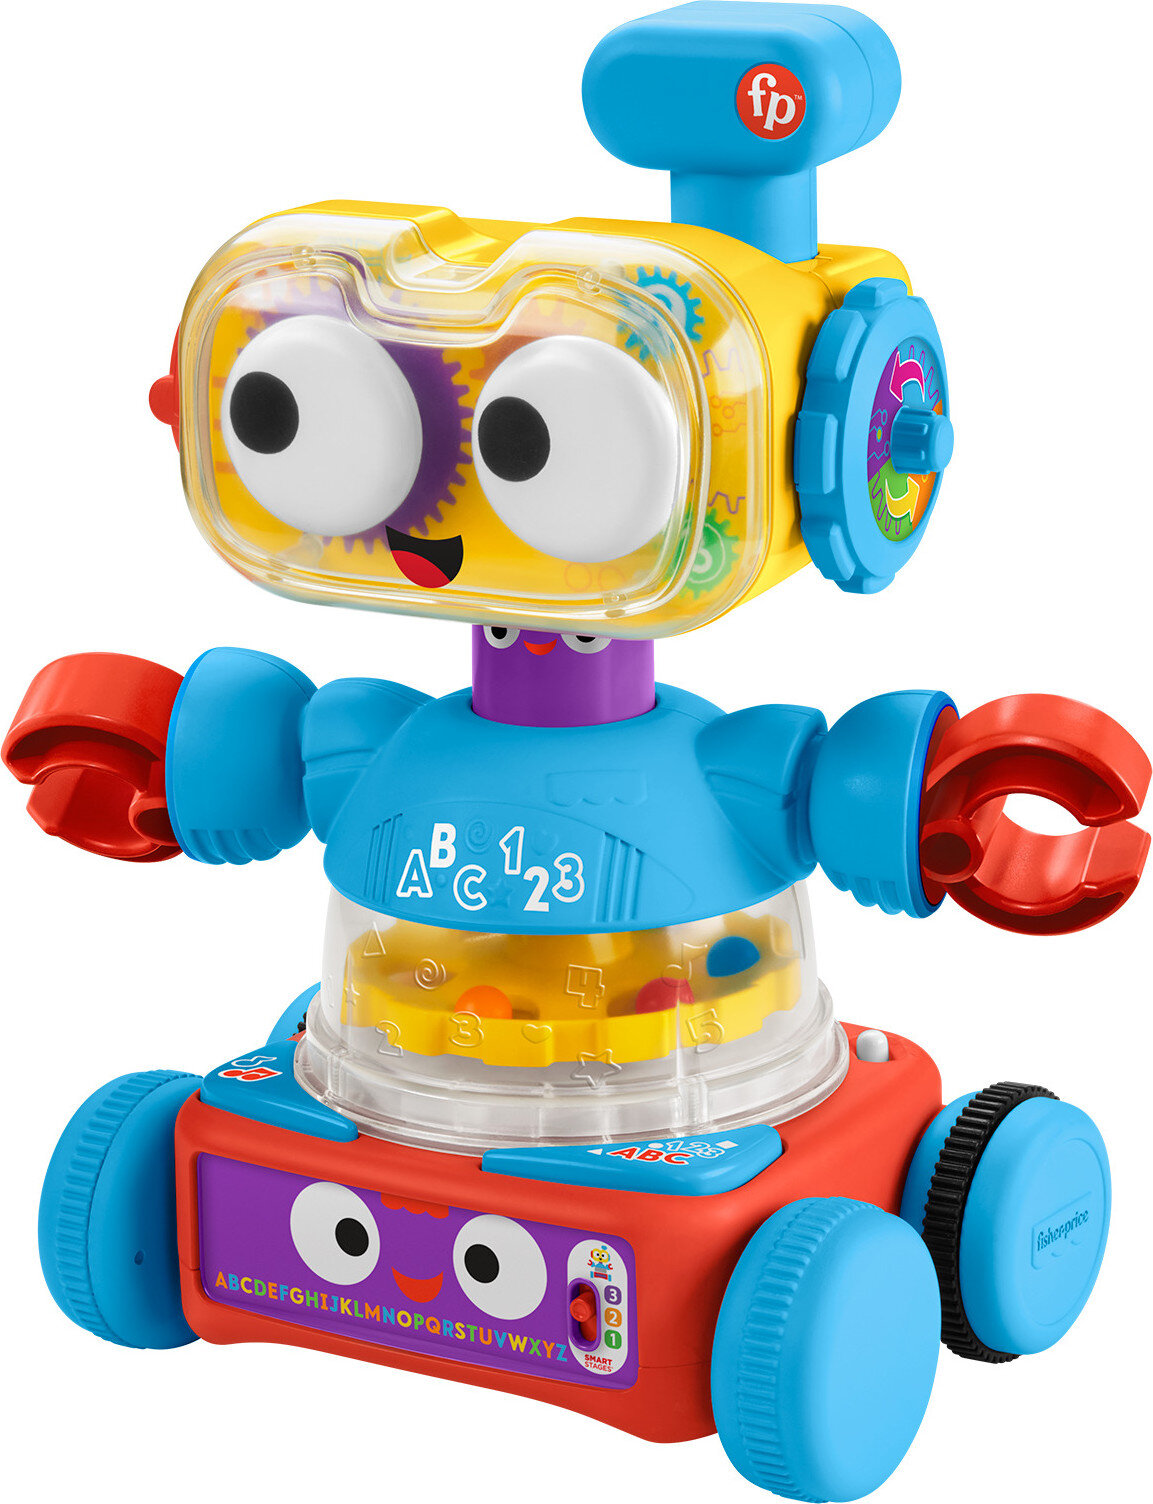 Fisher-Price 4-in-1 Learning Bot Interactive Toy Robot for Infants Toddlers and Preschool Kids - image 7 of 8